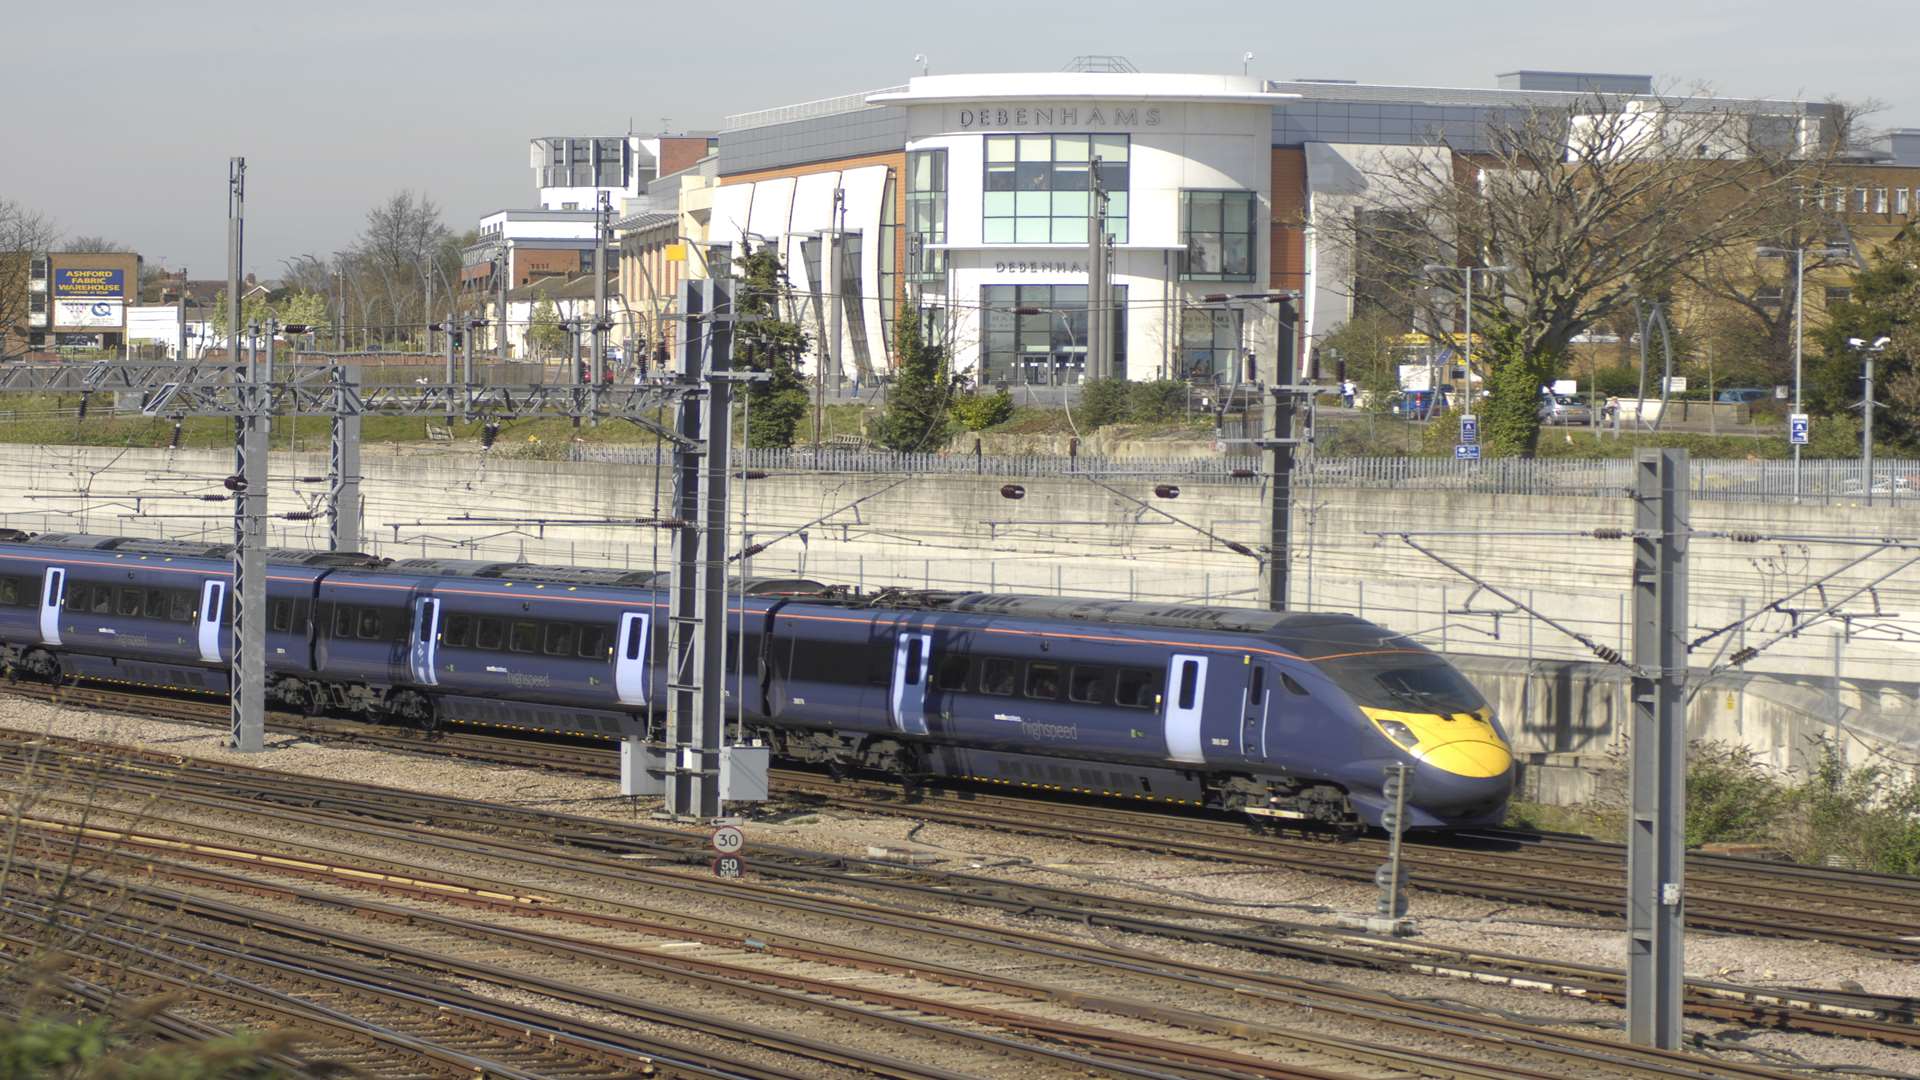 Sir Keith is credited with bringing the high-speed rail link to the town.